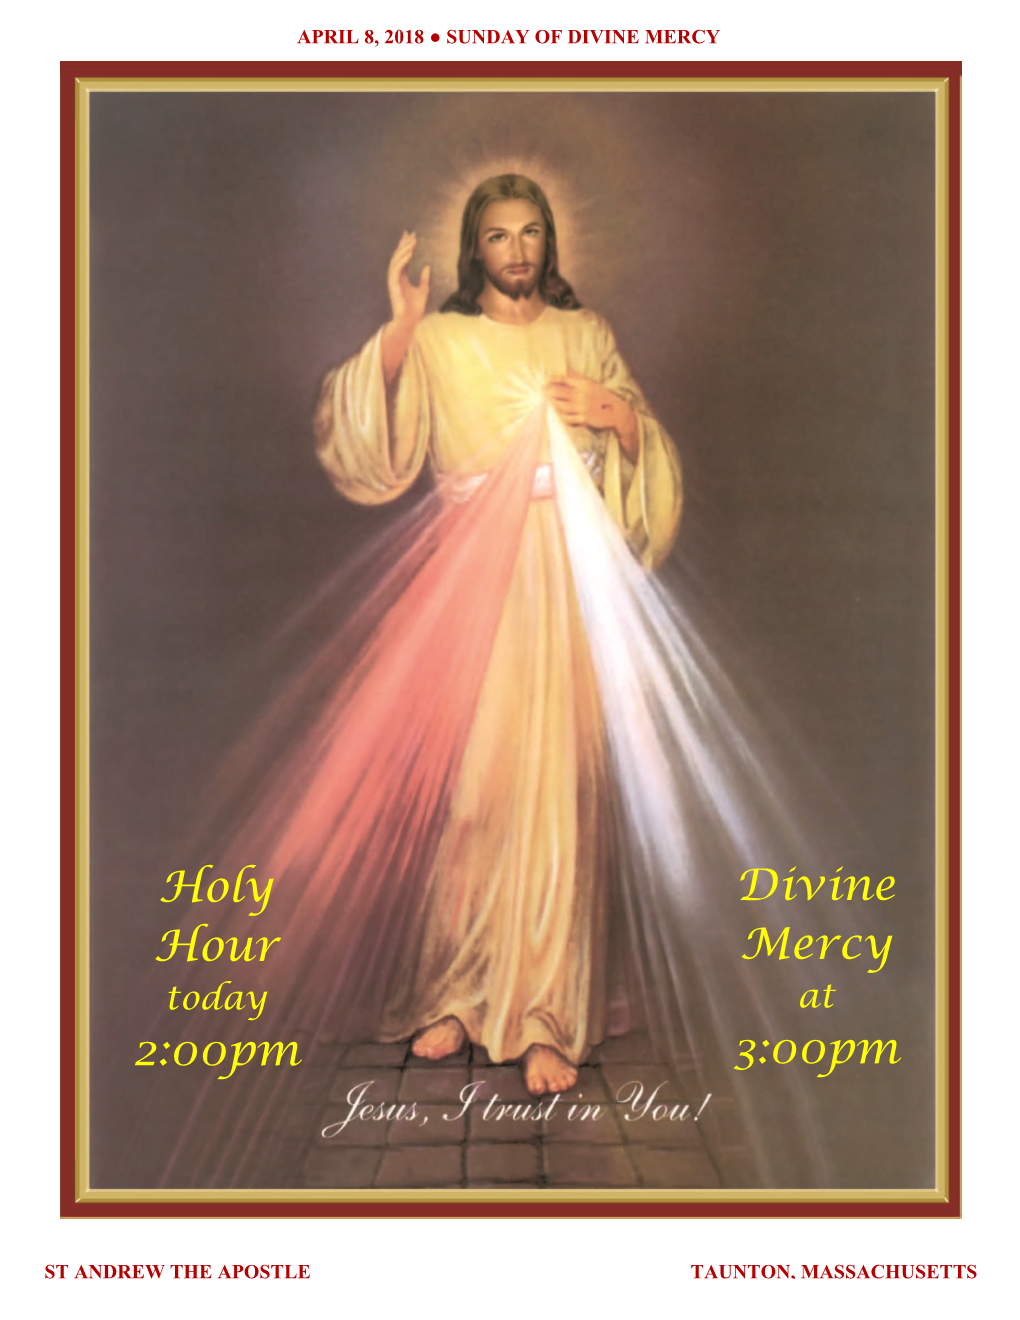 Pope Francis Said, Speaking at the OCTAVE of EASTER, Vigil for the Feast of Divine Mercy